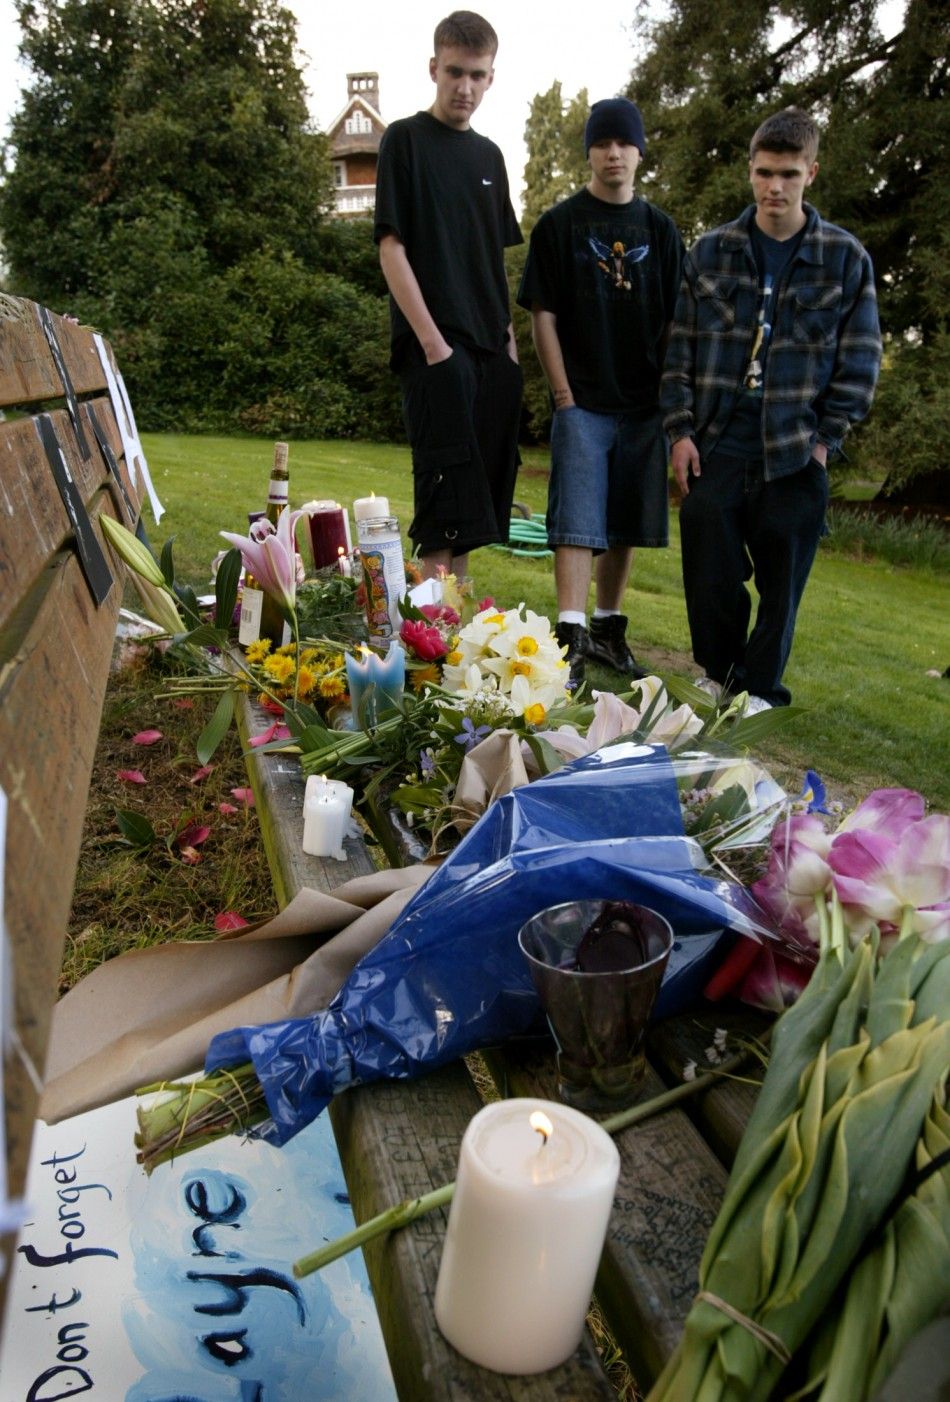 Fans look at an informal memorial of flowers, candles and artwork placed on a park bench at Viretta Park in Seattle, Washington